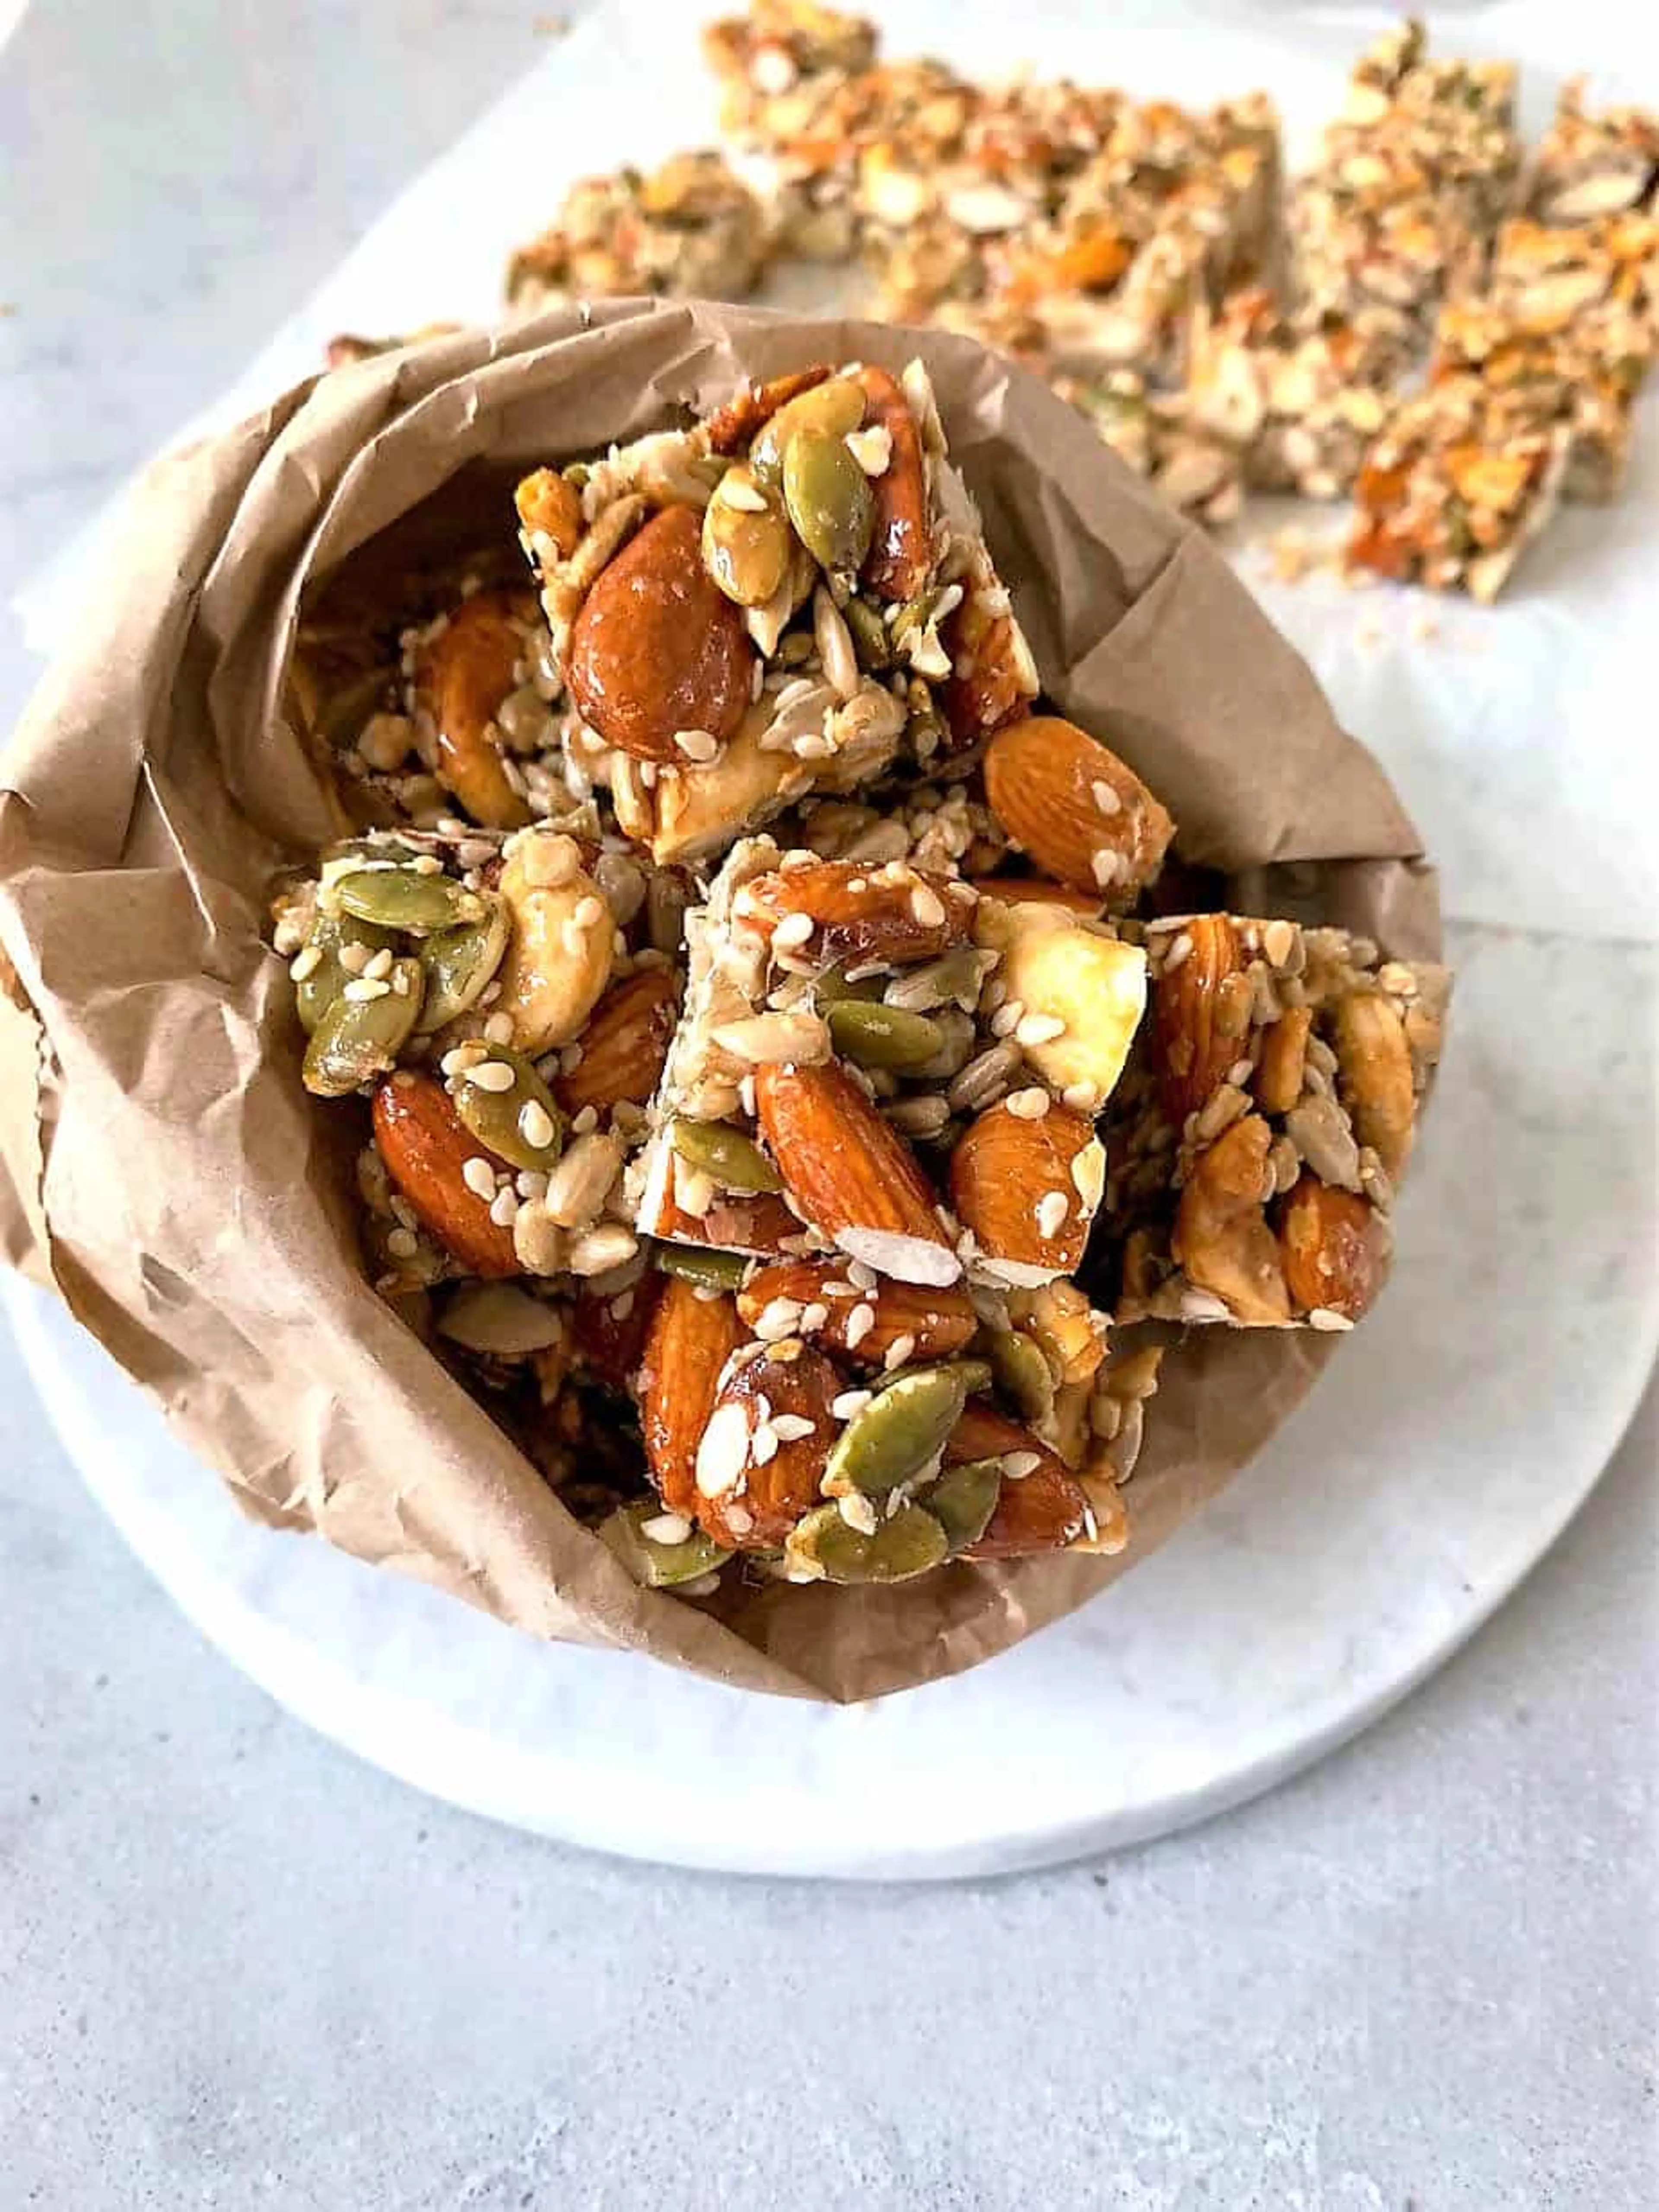 Healthy Nut Bar Recipe Thermomix